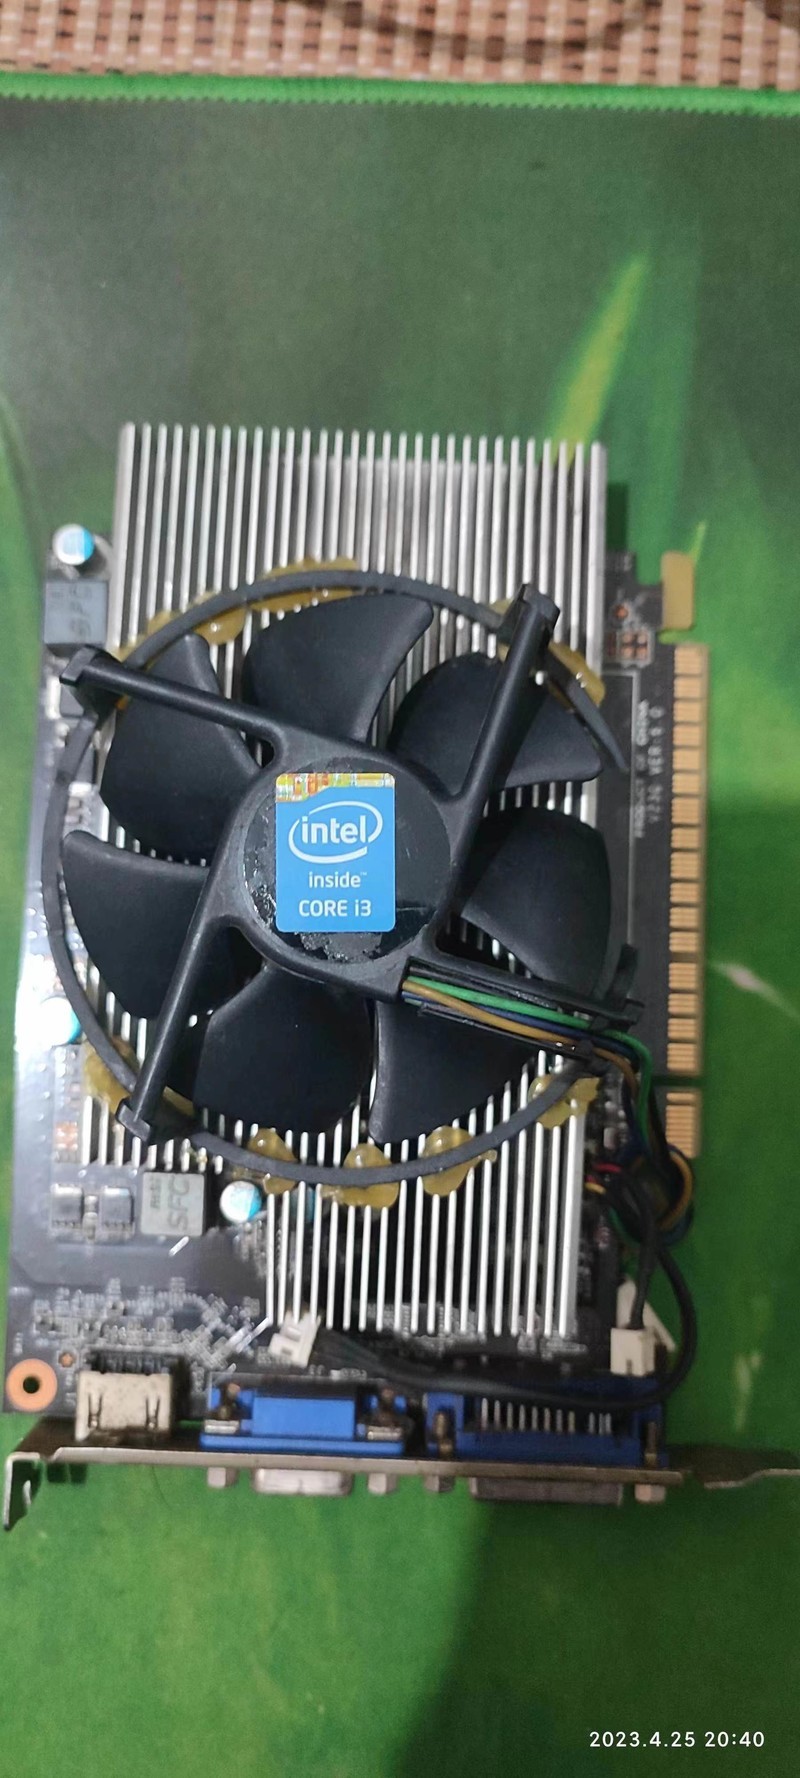  Take a look at an Intel i3 independent graphics card!